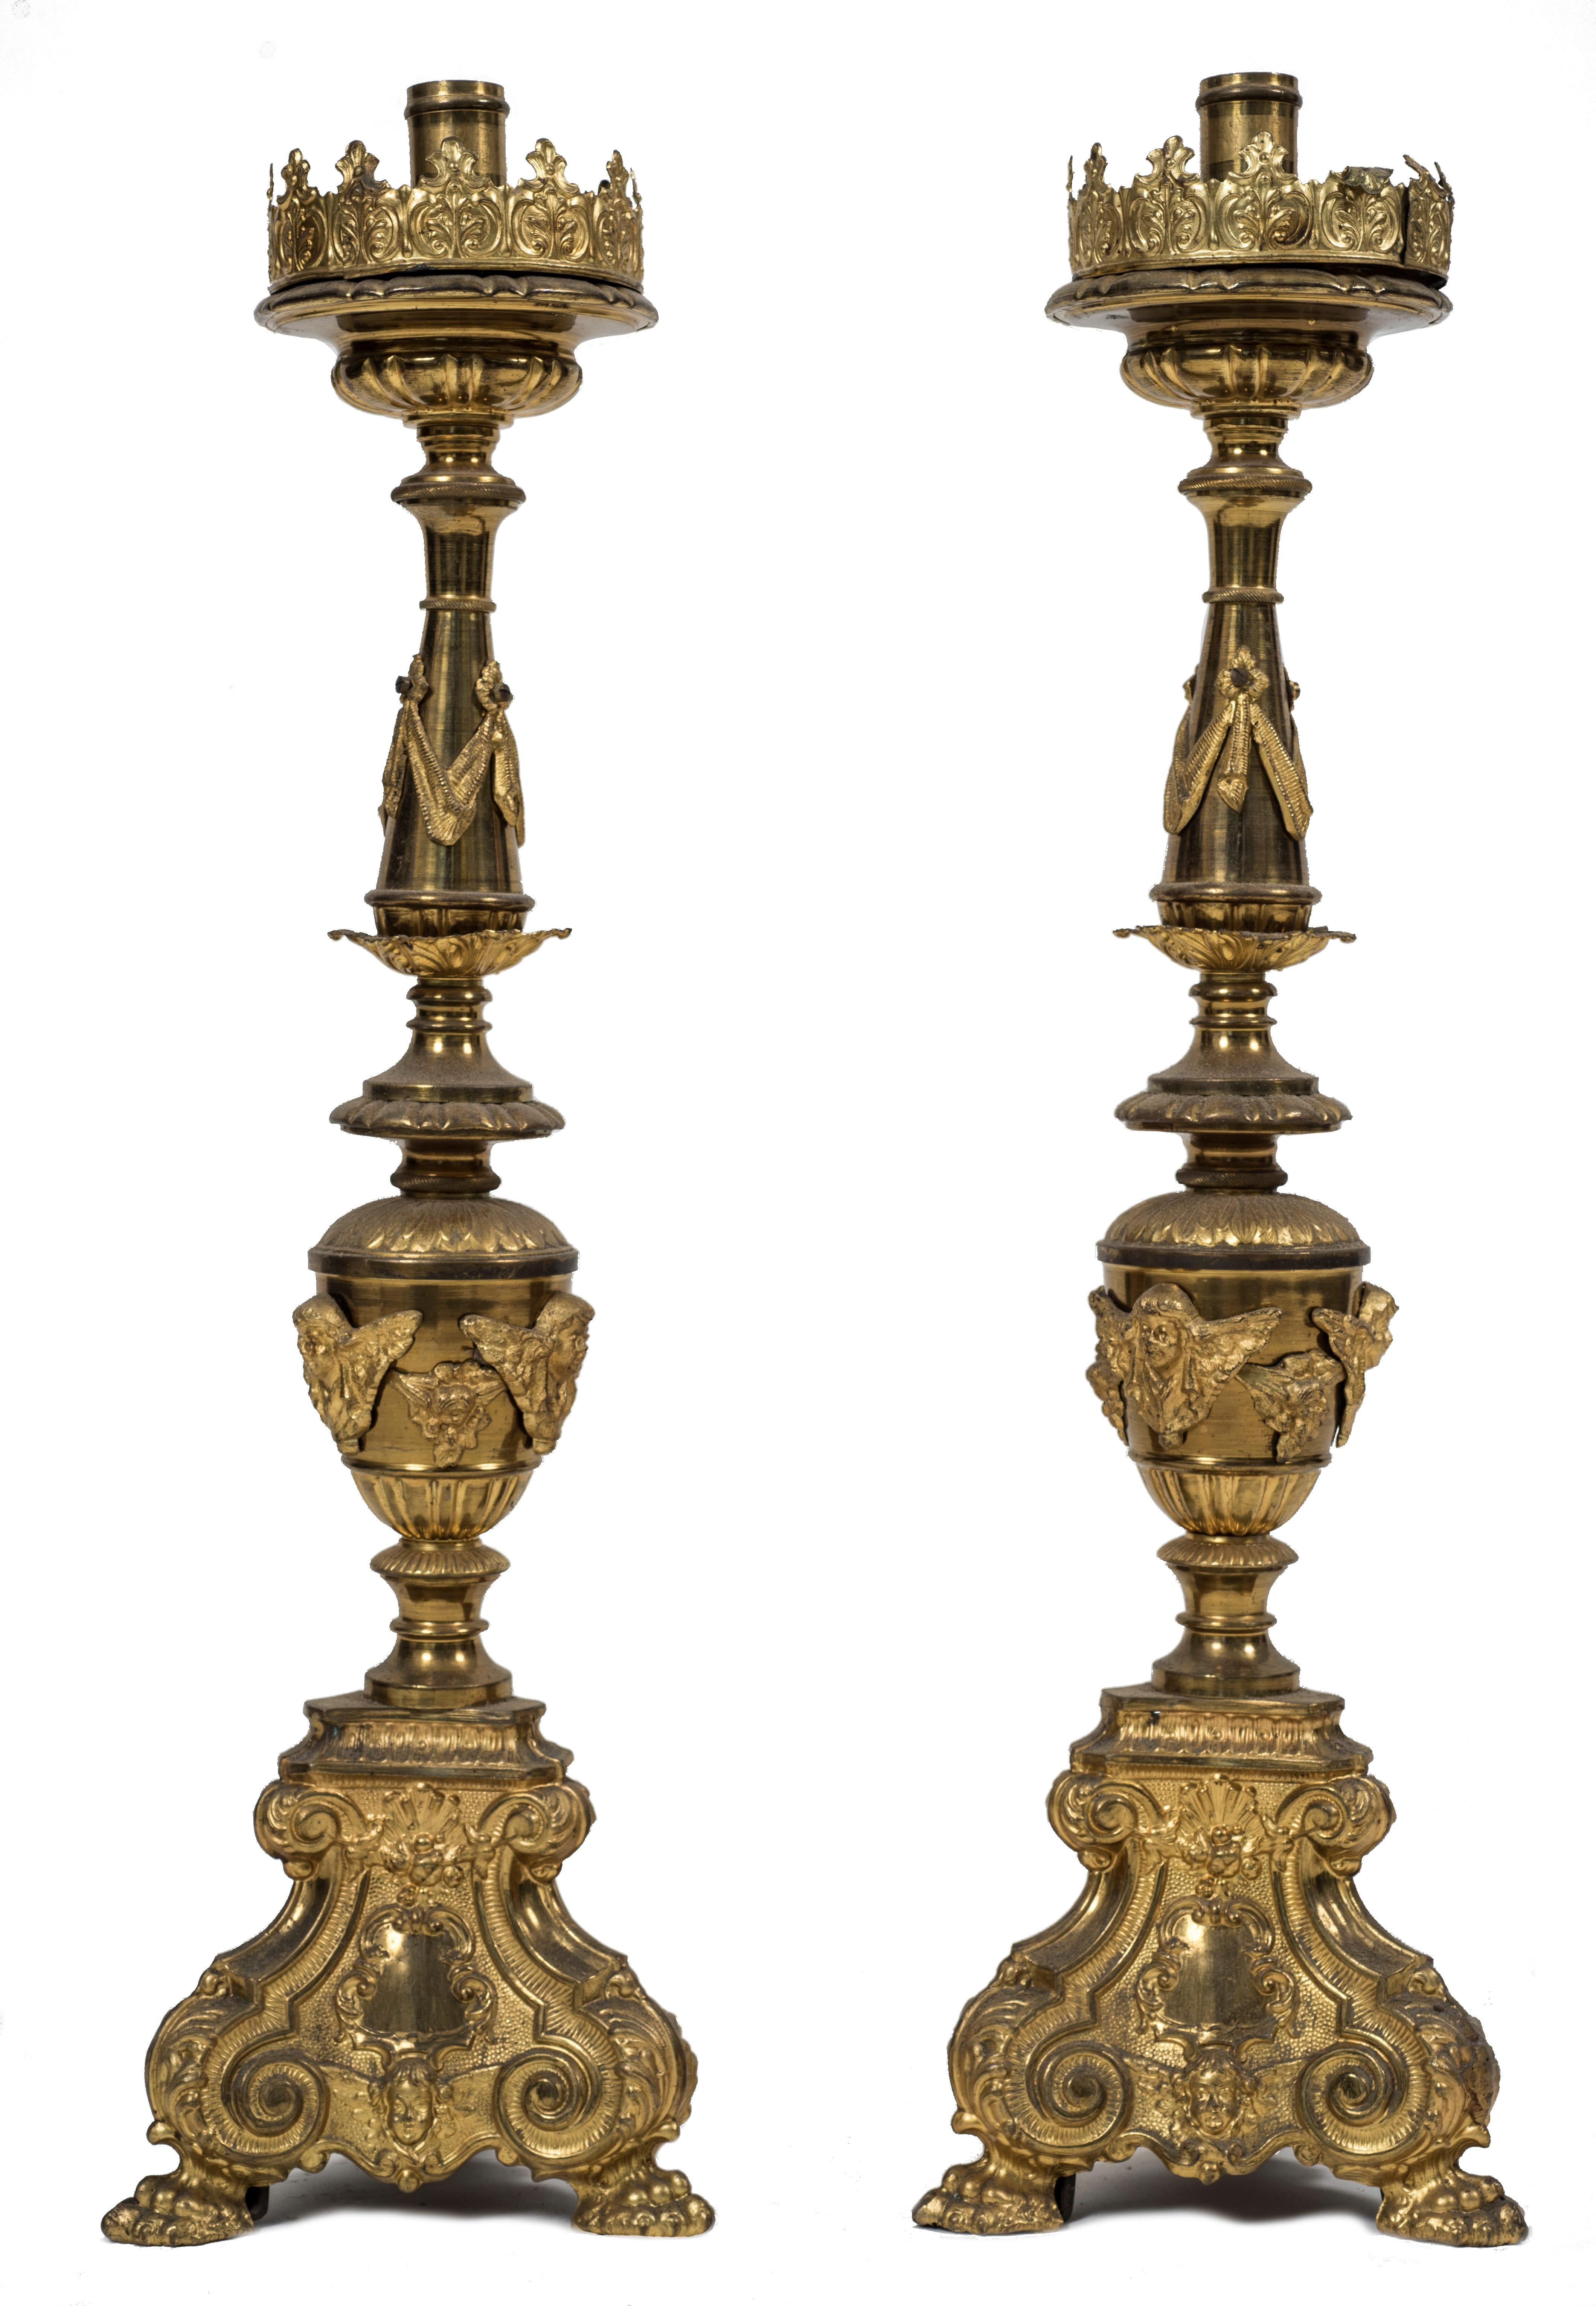 This pair of candlesticks is a beautiful decorative object in brass and gilded metal in Baroque style.
Realized at the end of the 18th century.

Very good conditions.

A very elegant couple of candleholders with precious decorations.

This